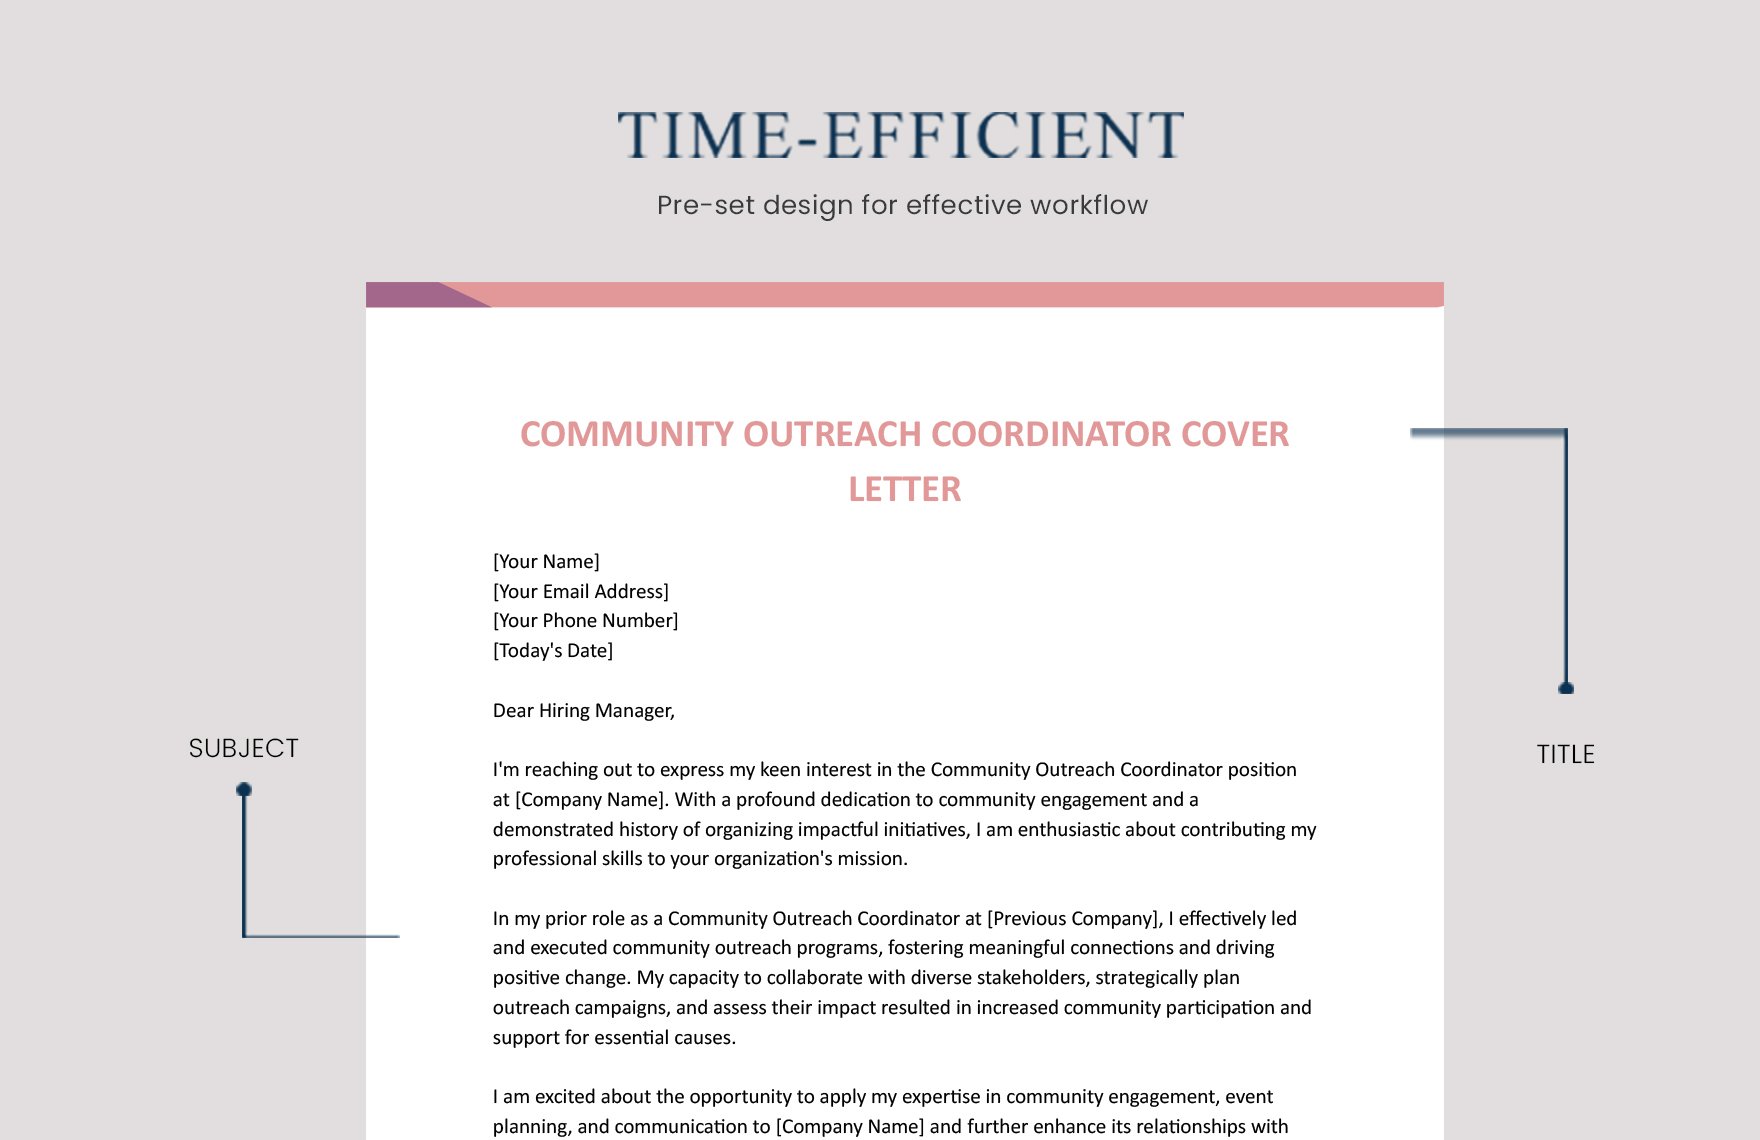 Community Outreach Coordinator Cover Letter